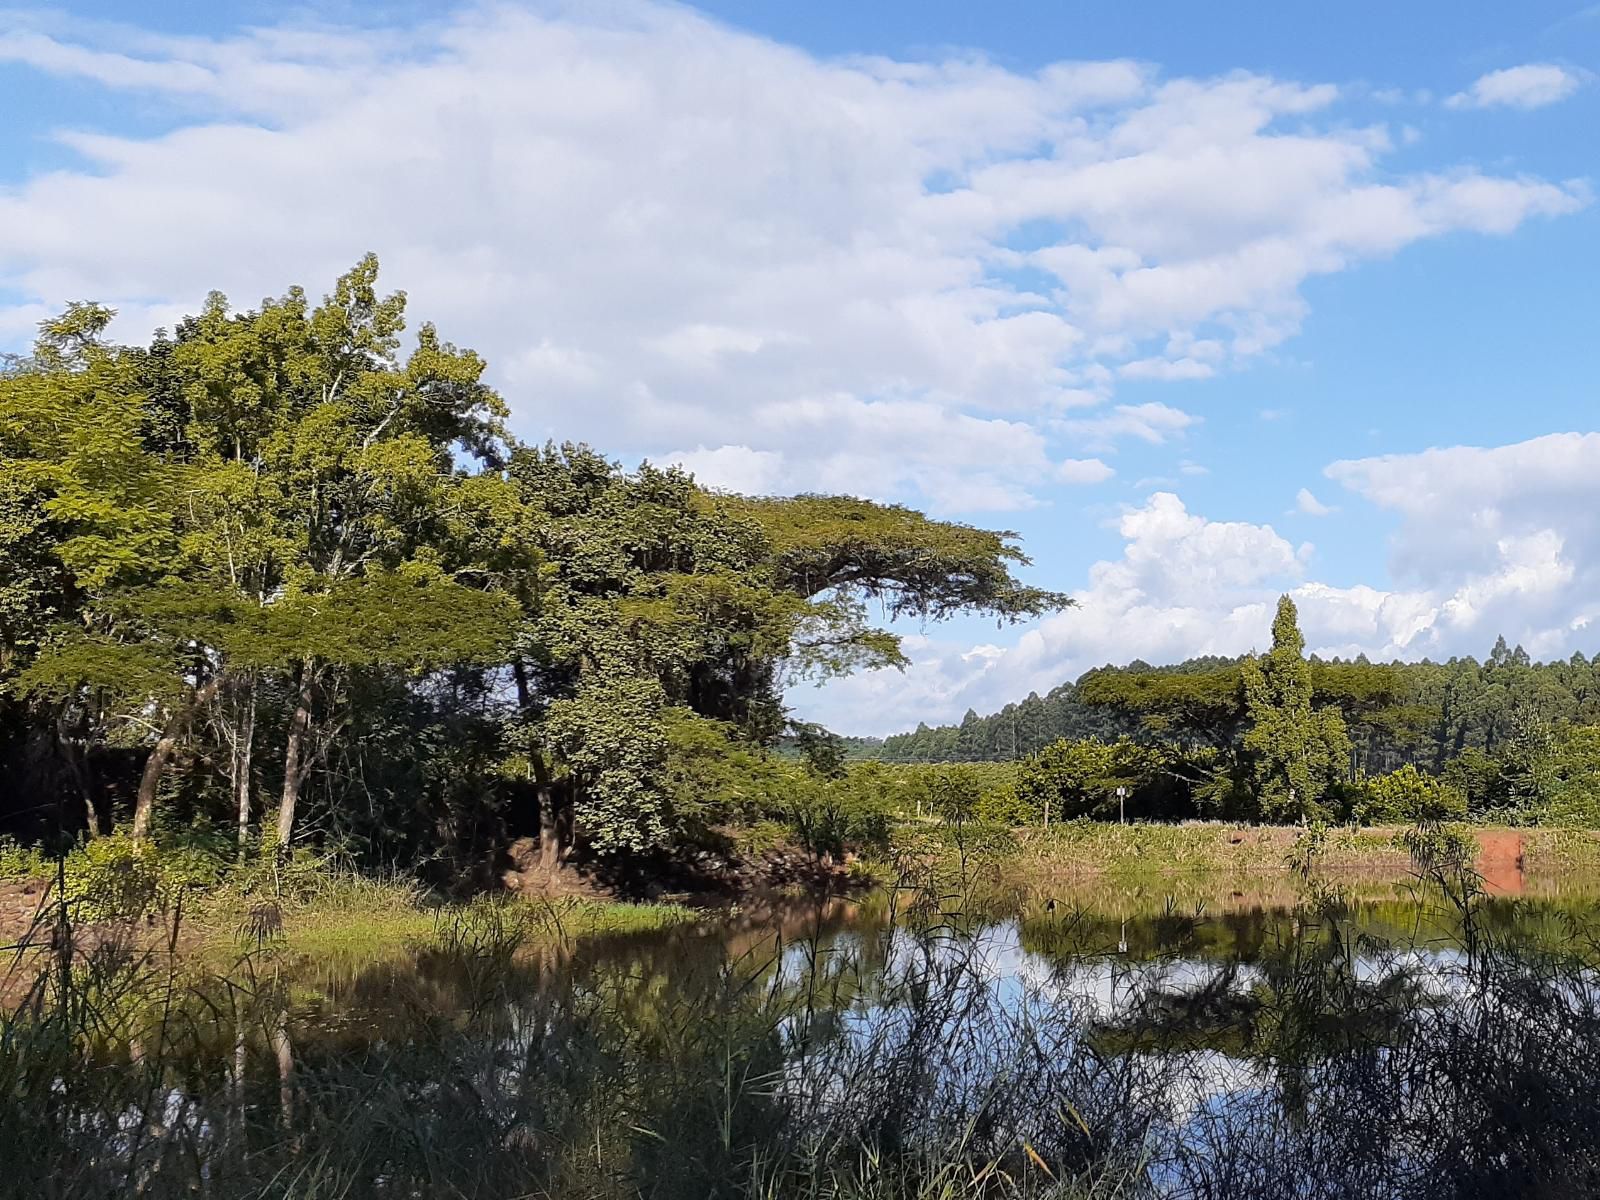 Boschoek Farm Modjadjiskloof Limpopo Province South Africa Complementary Colors, River, Nature, Waters, Tree, Plant, Wood